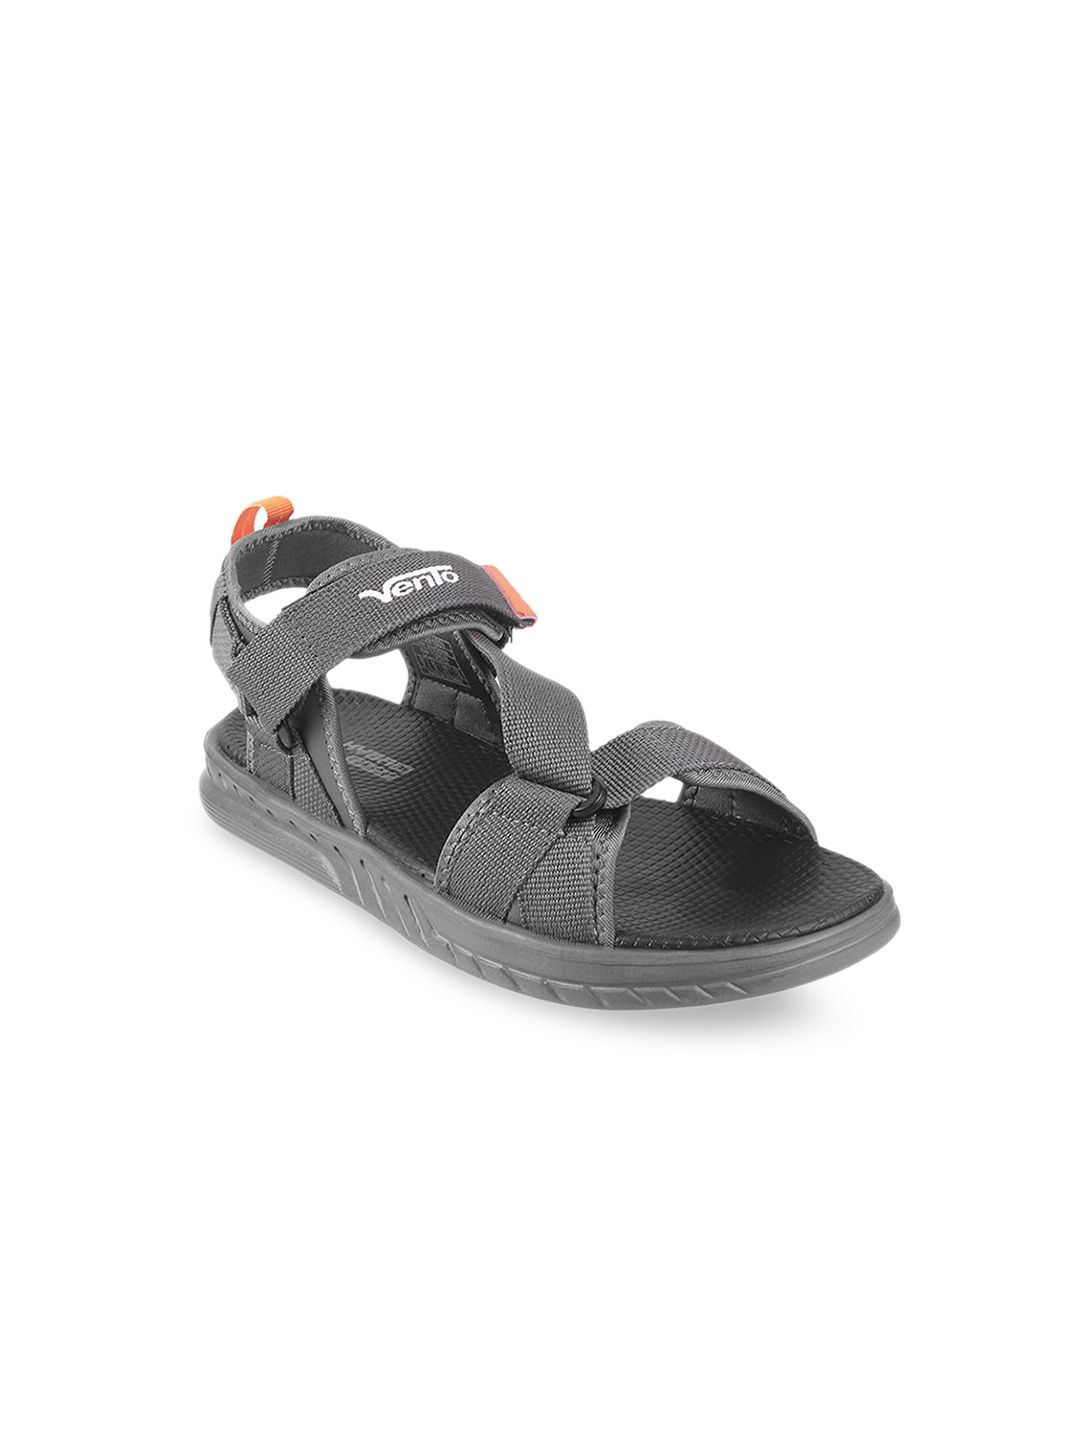 Vento Grey & White Solid Sports Sandals Price in India